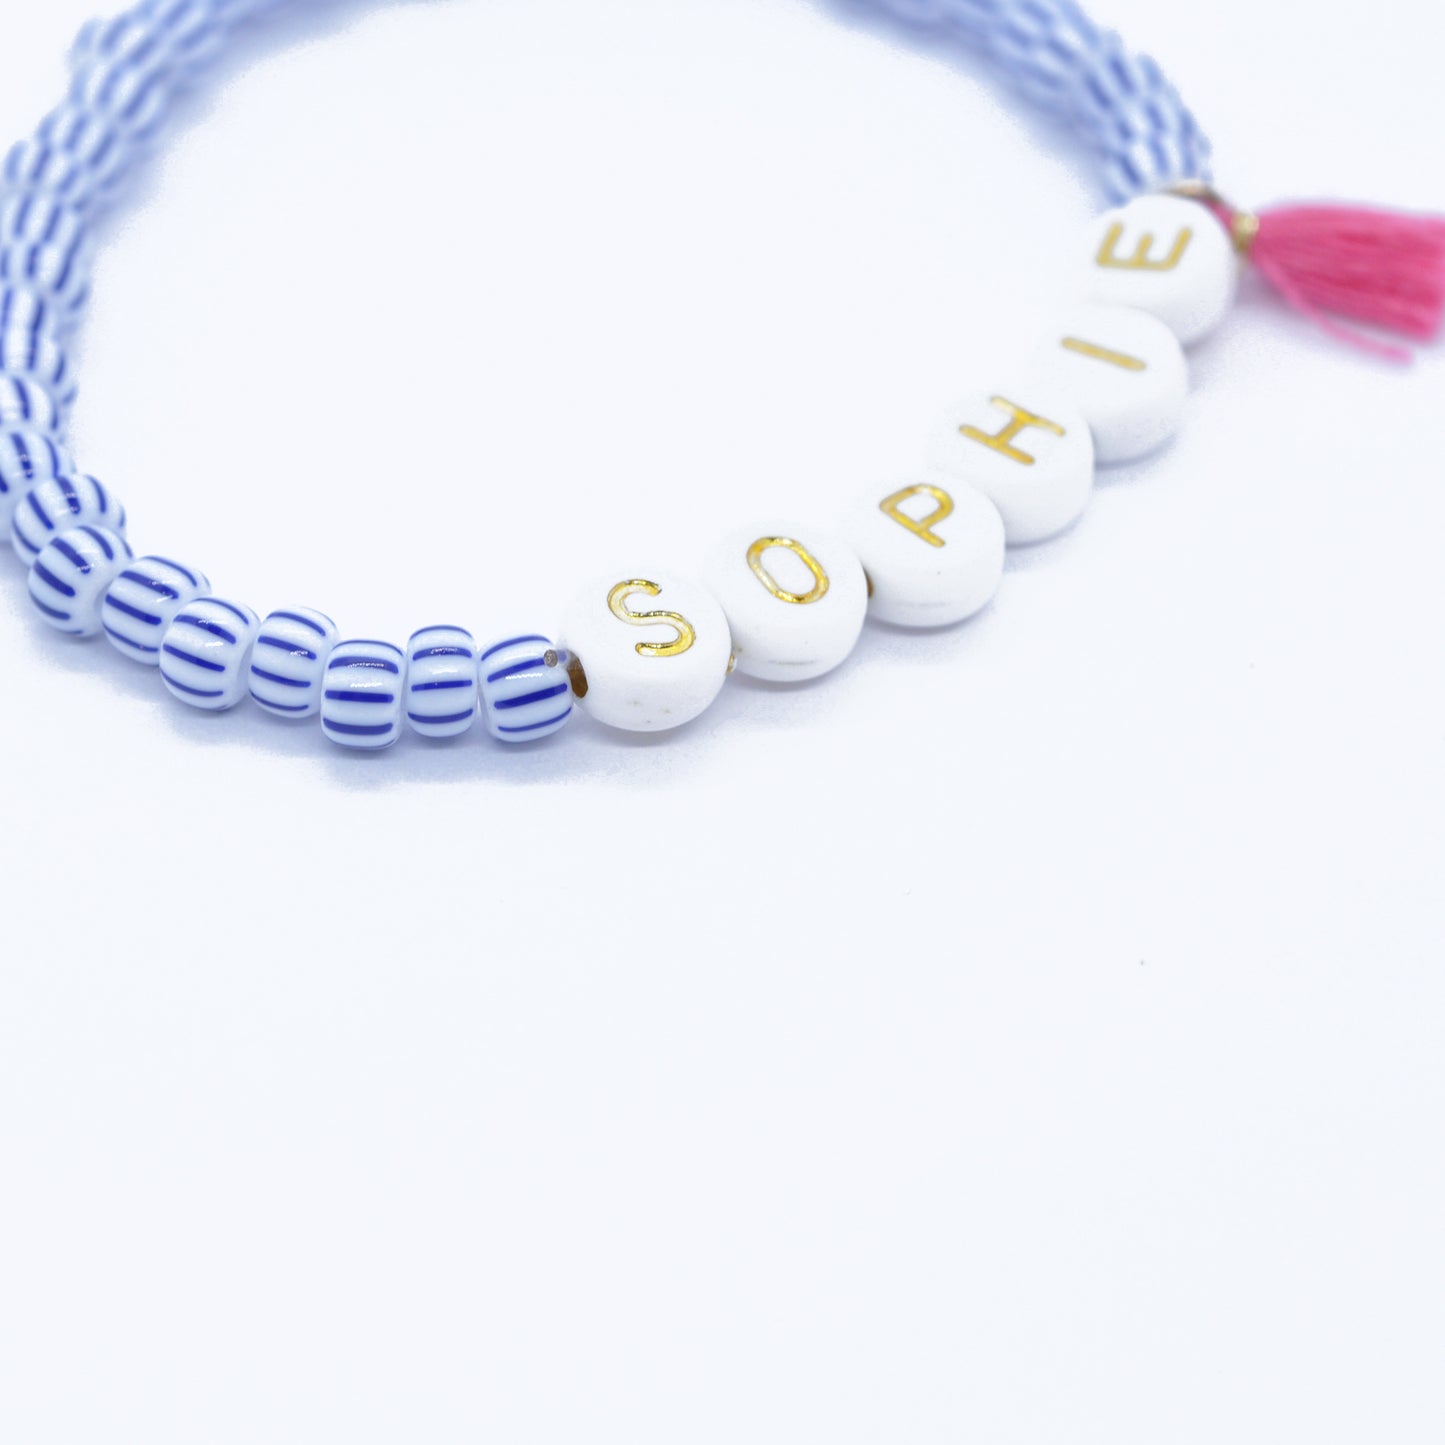 Personalized name bracelet - letters white gold with tassel